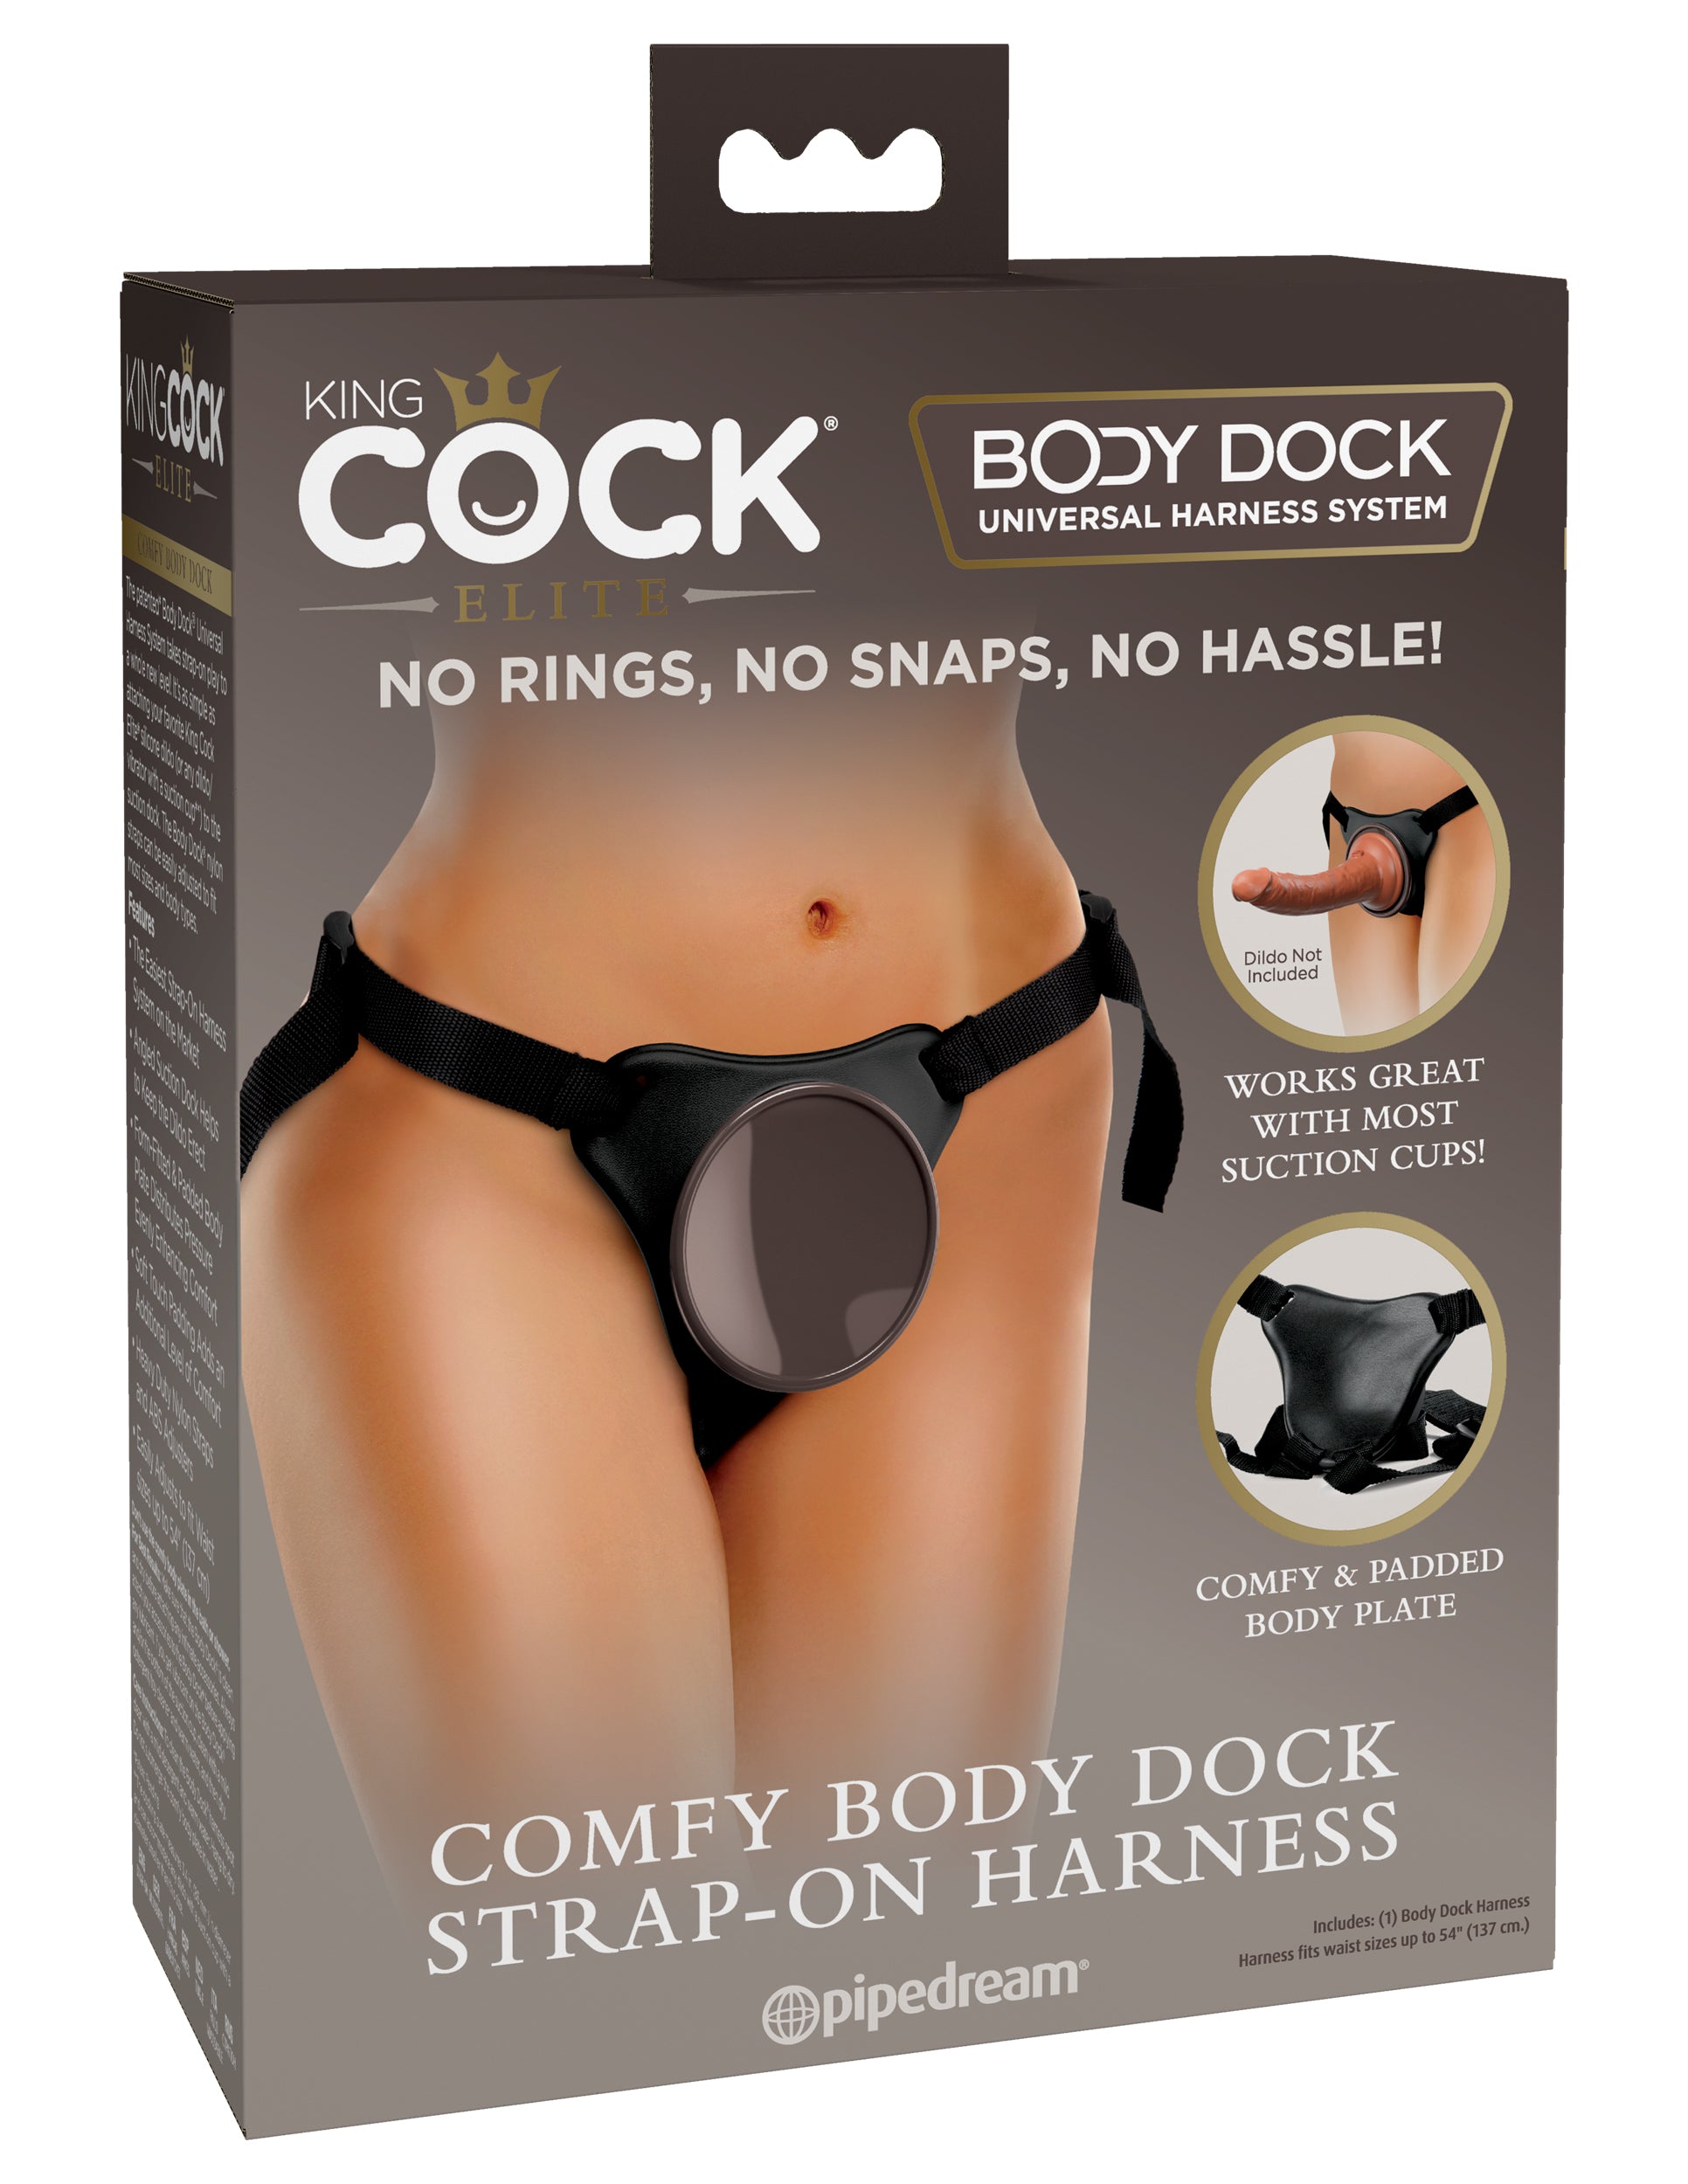 King Cock® Elite Comfy Body Dock Strap-On Harness pic